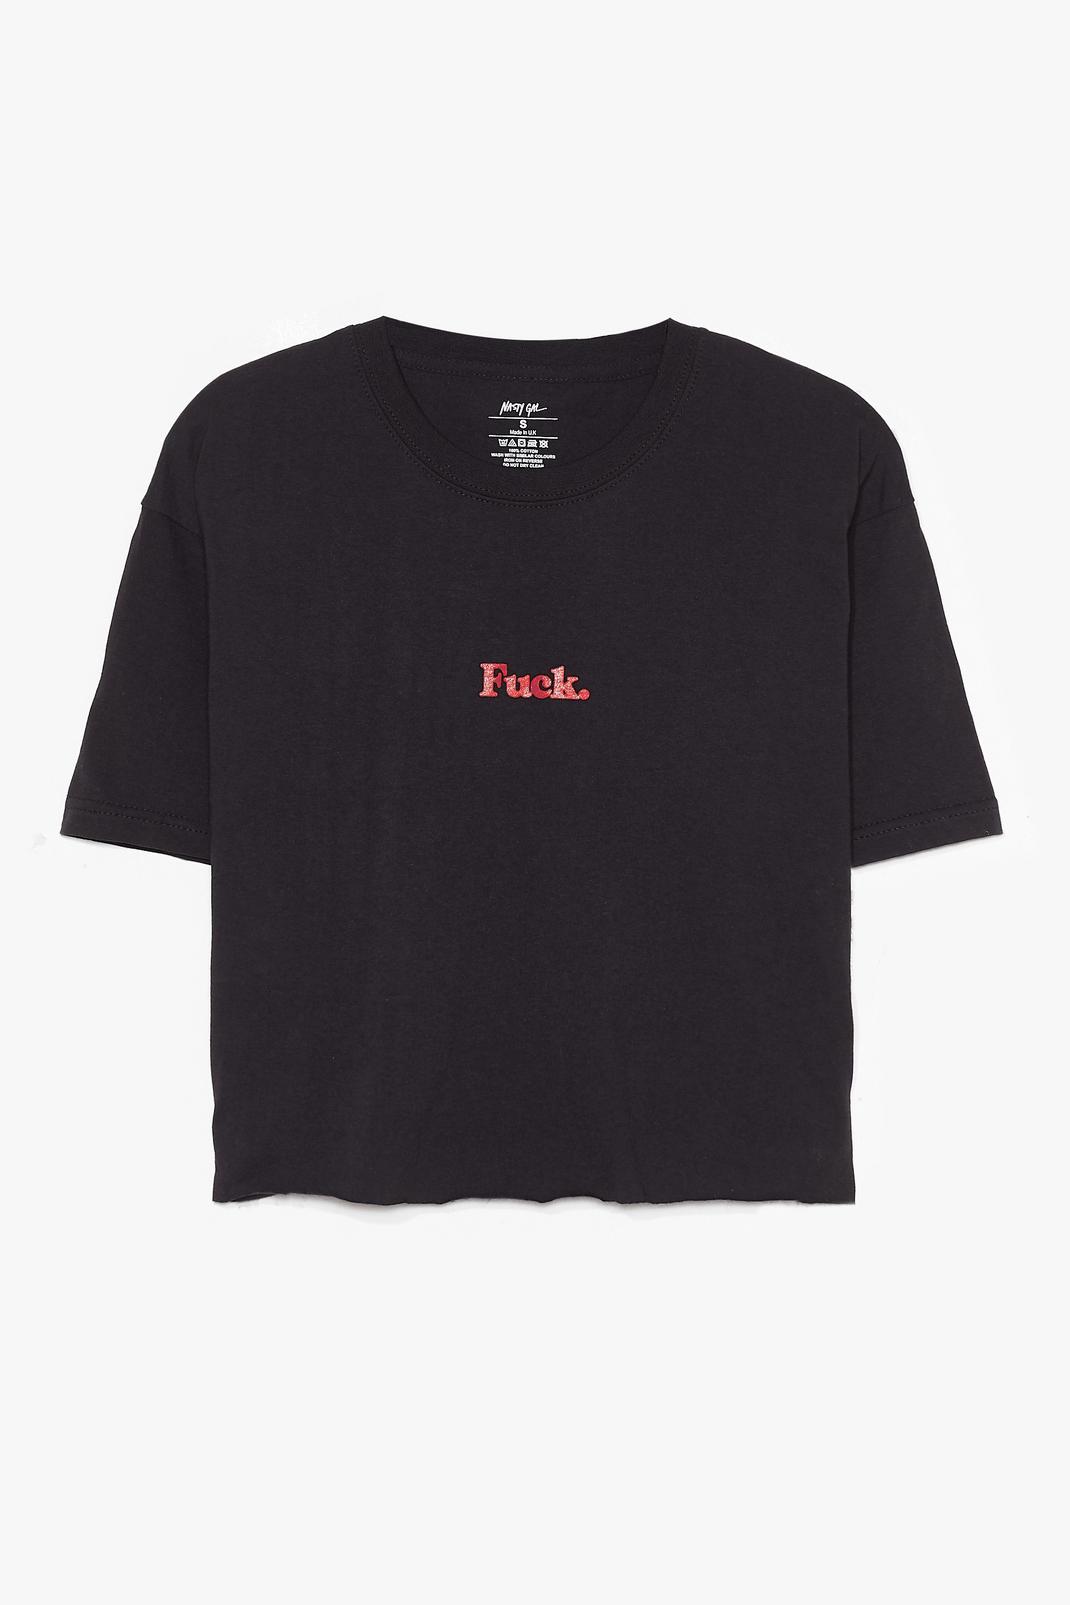 Oh Fuck Graphic Cropped Tee image number 1